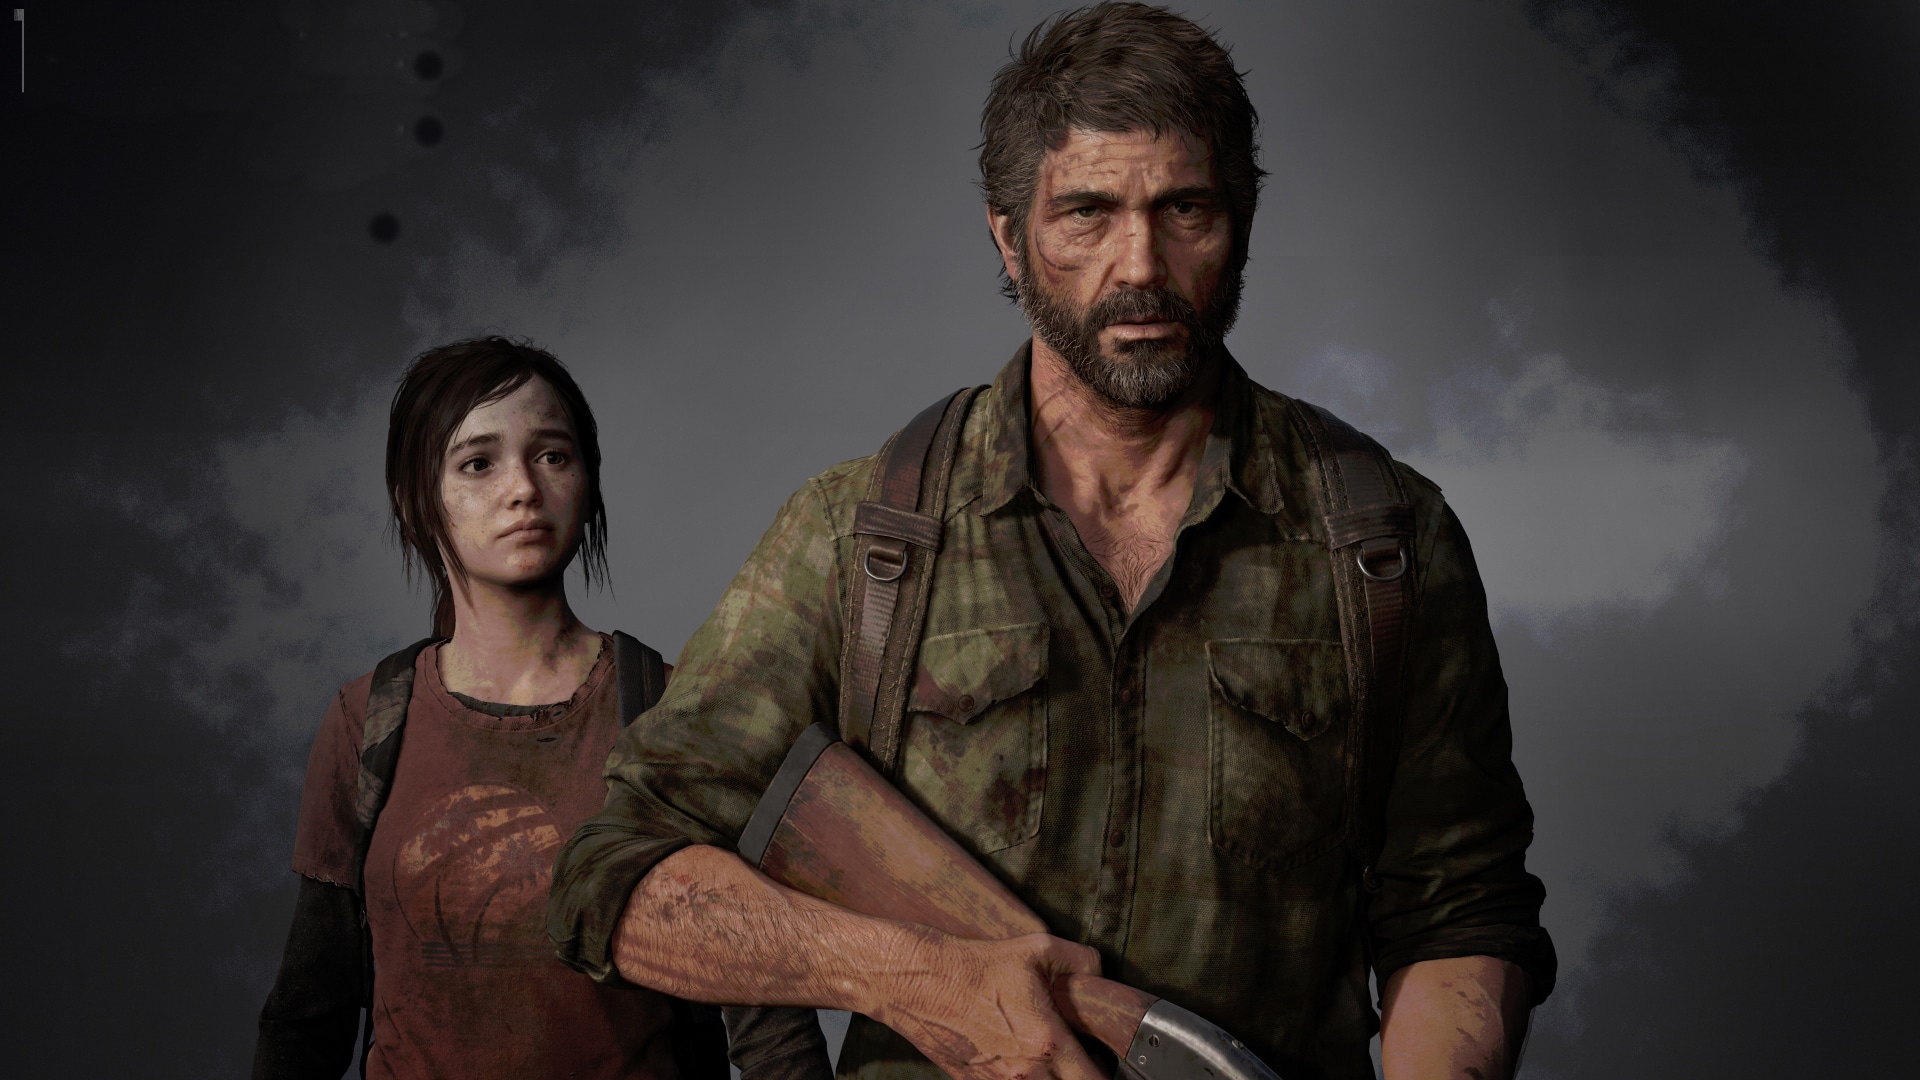 The Last of Us HBO Series Set Photos Reveal First Look at Tommy